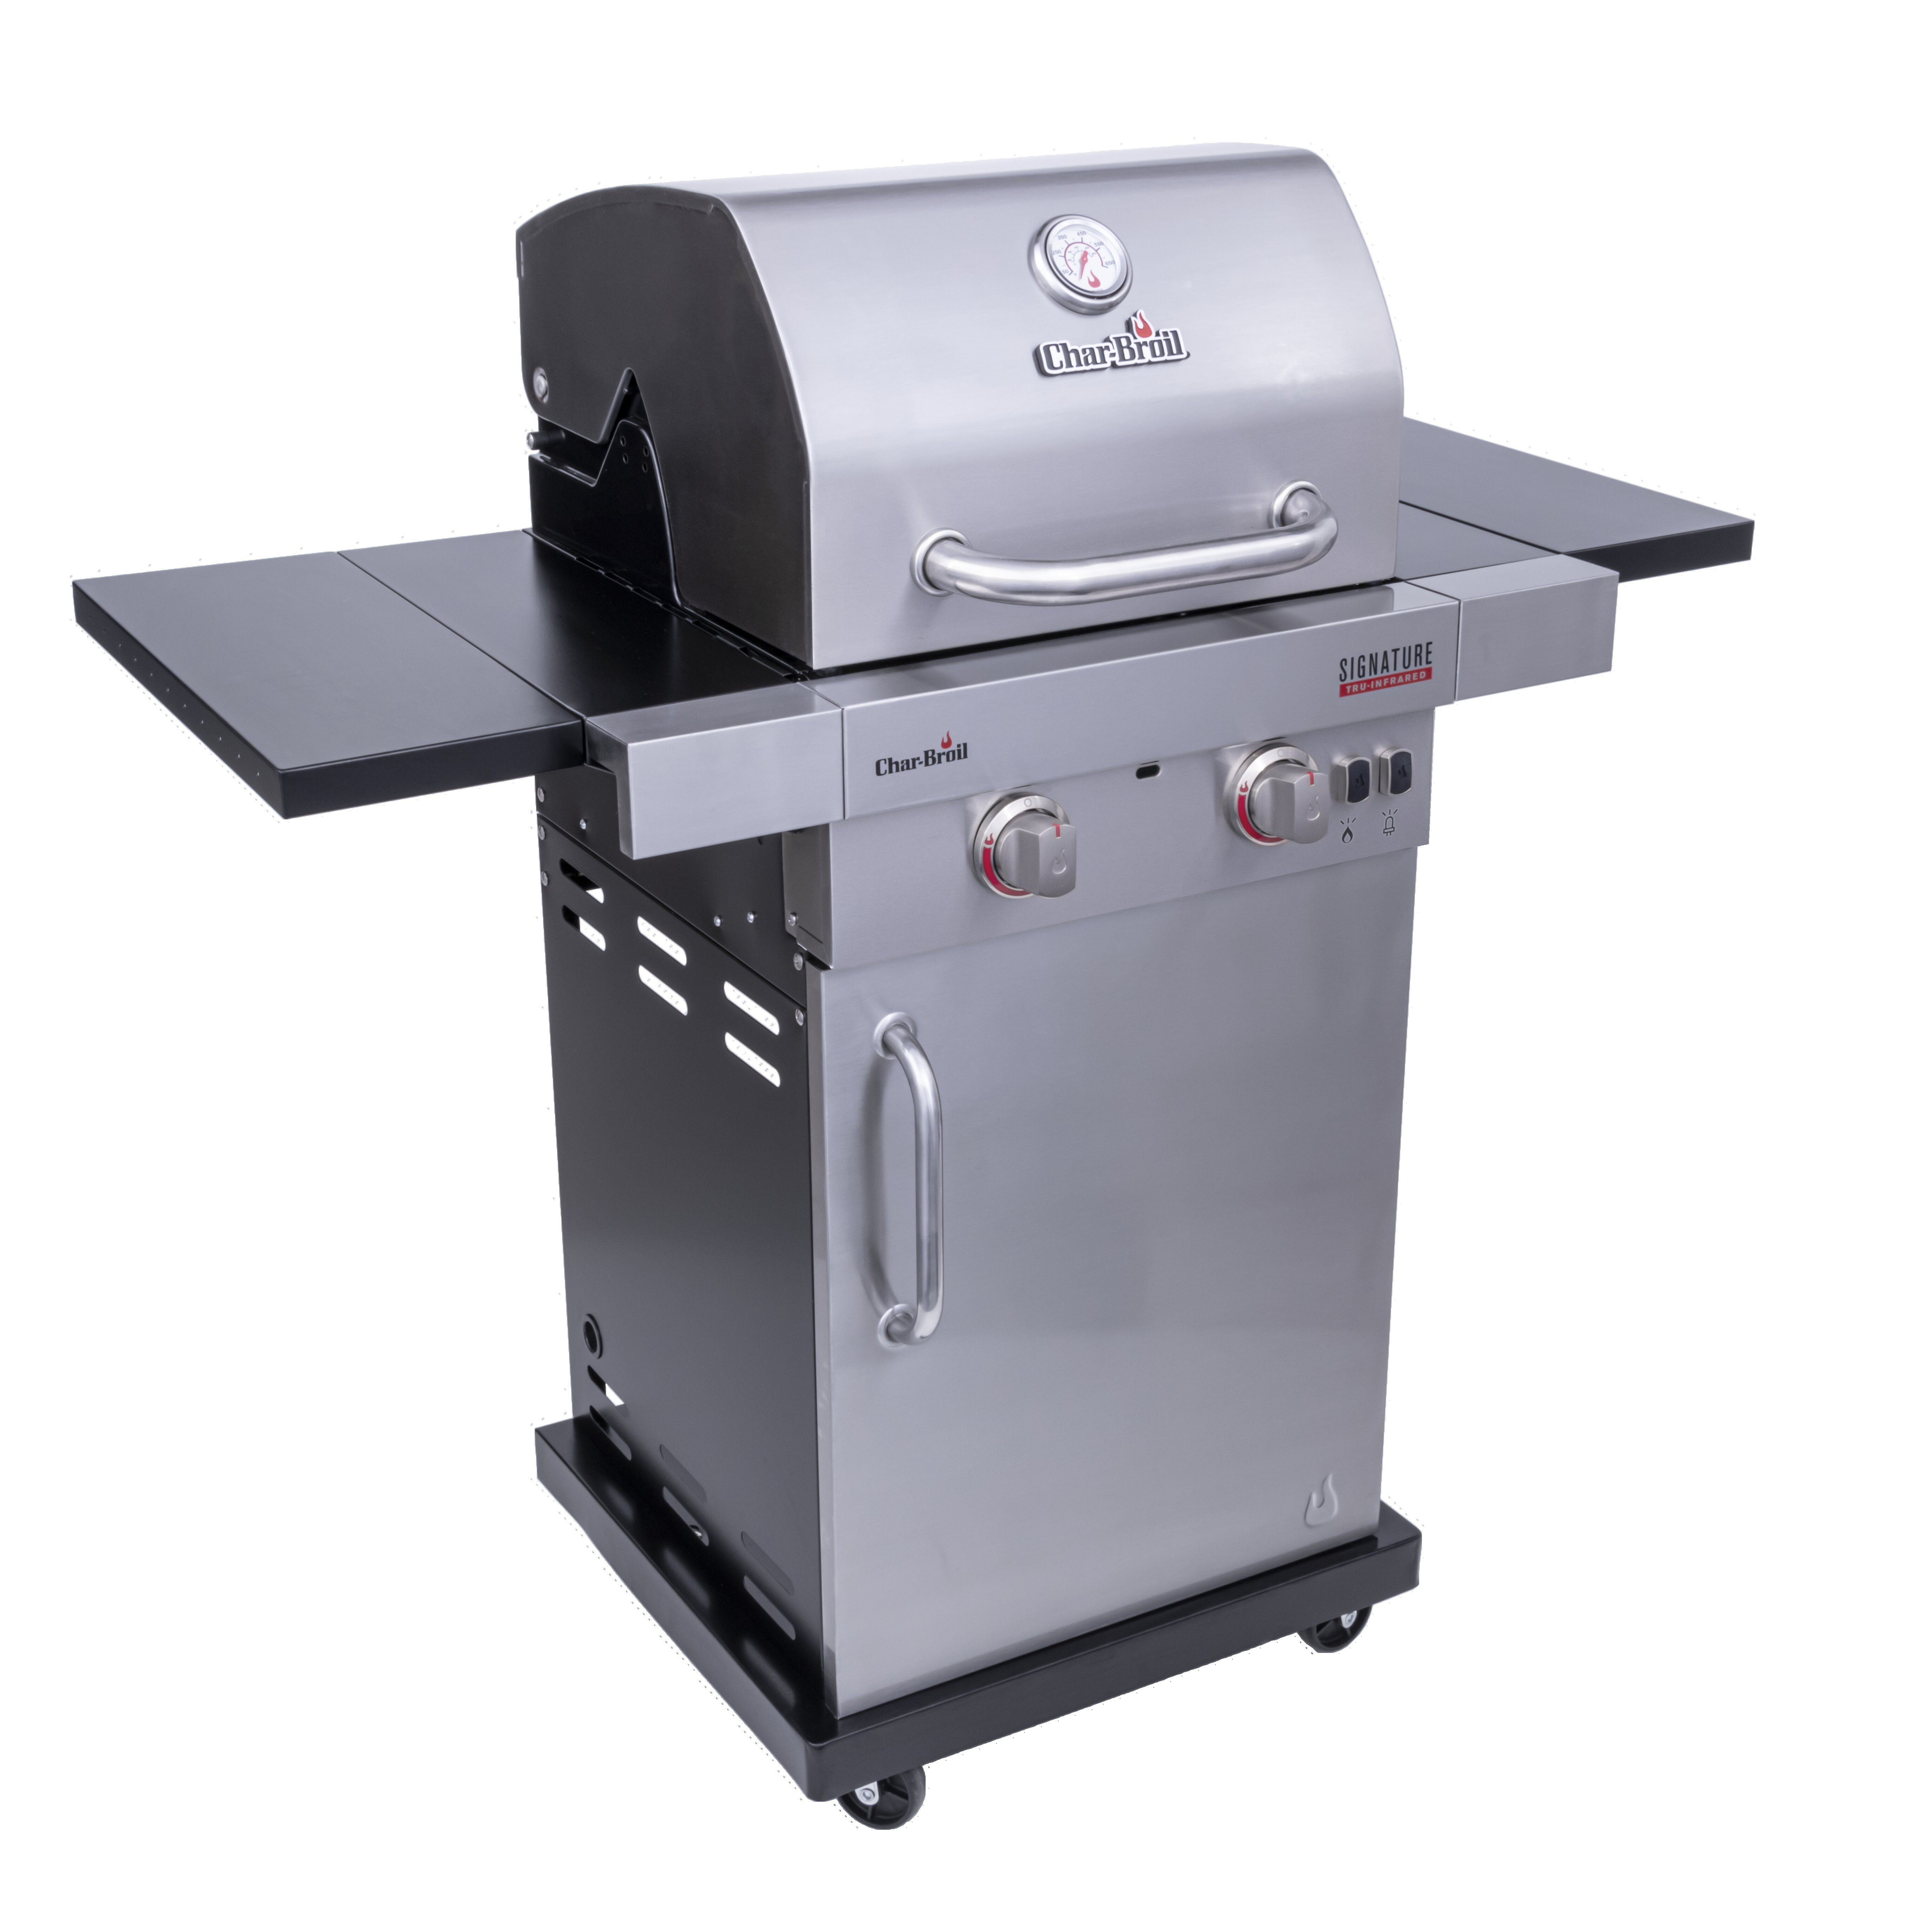 CharBroil Char-Broil Signature 2-Burner Propane Gas Grill with & Reviews | Wayfair